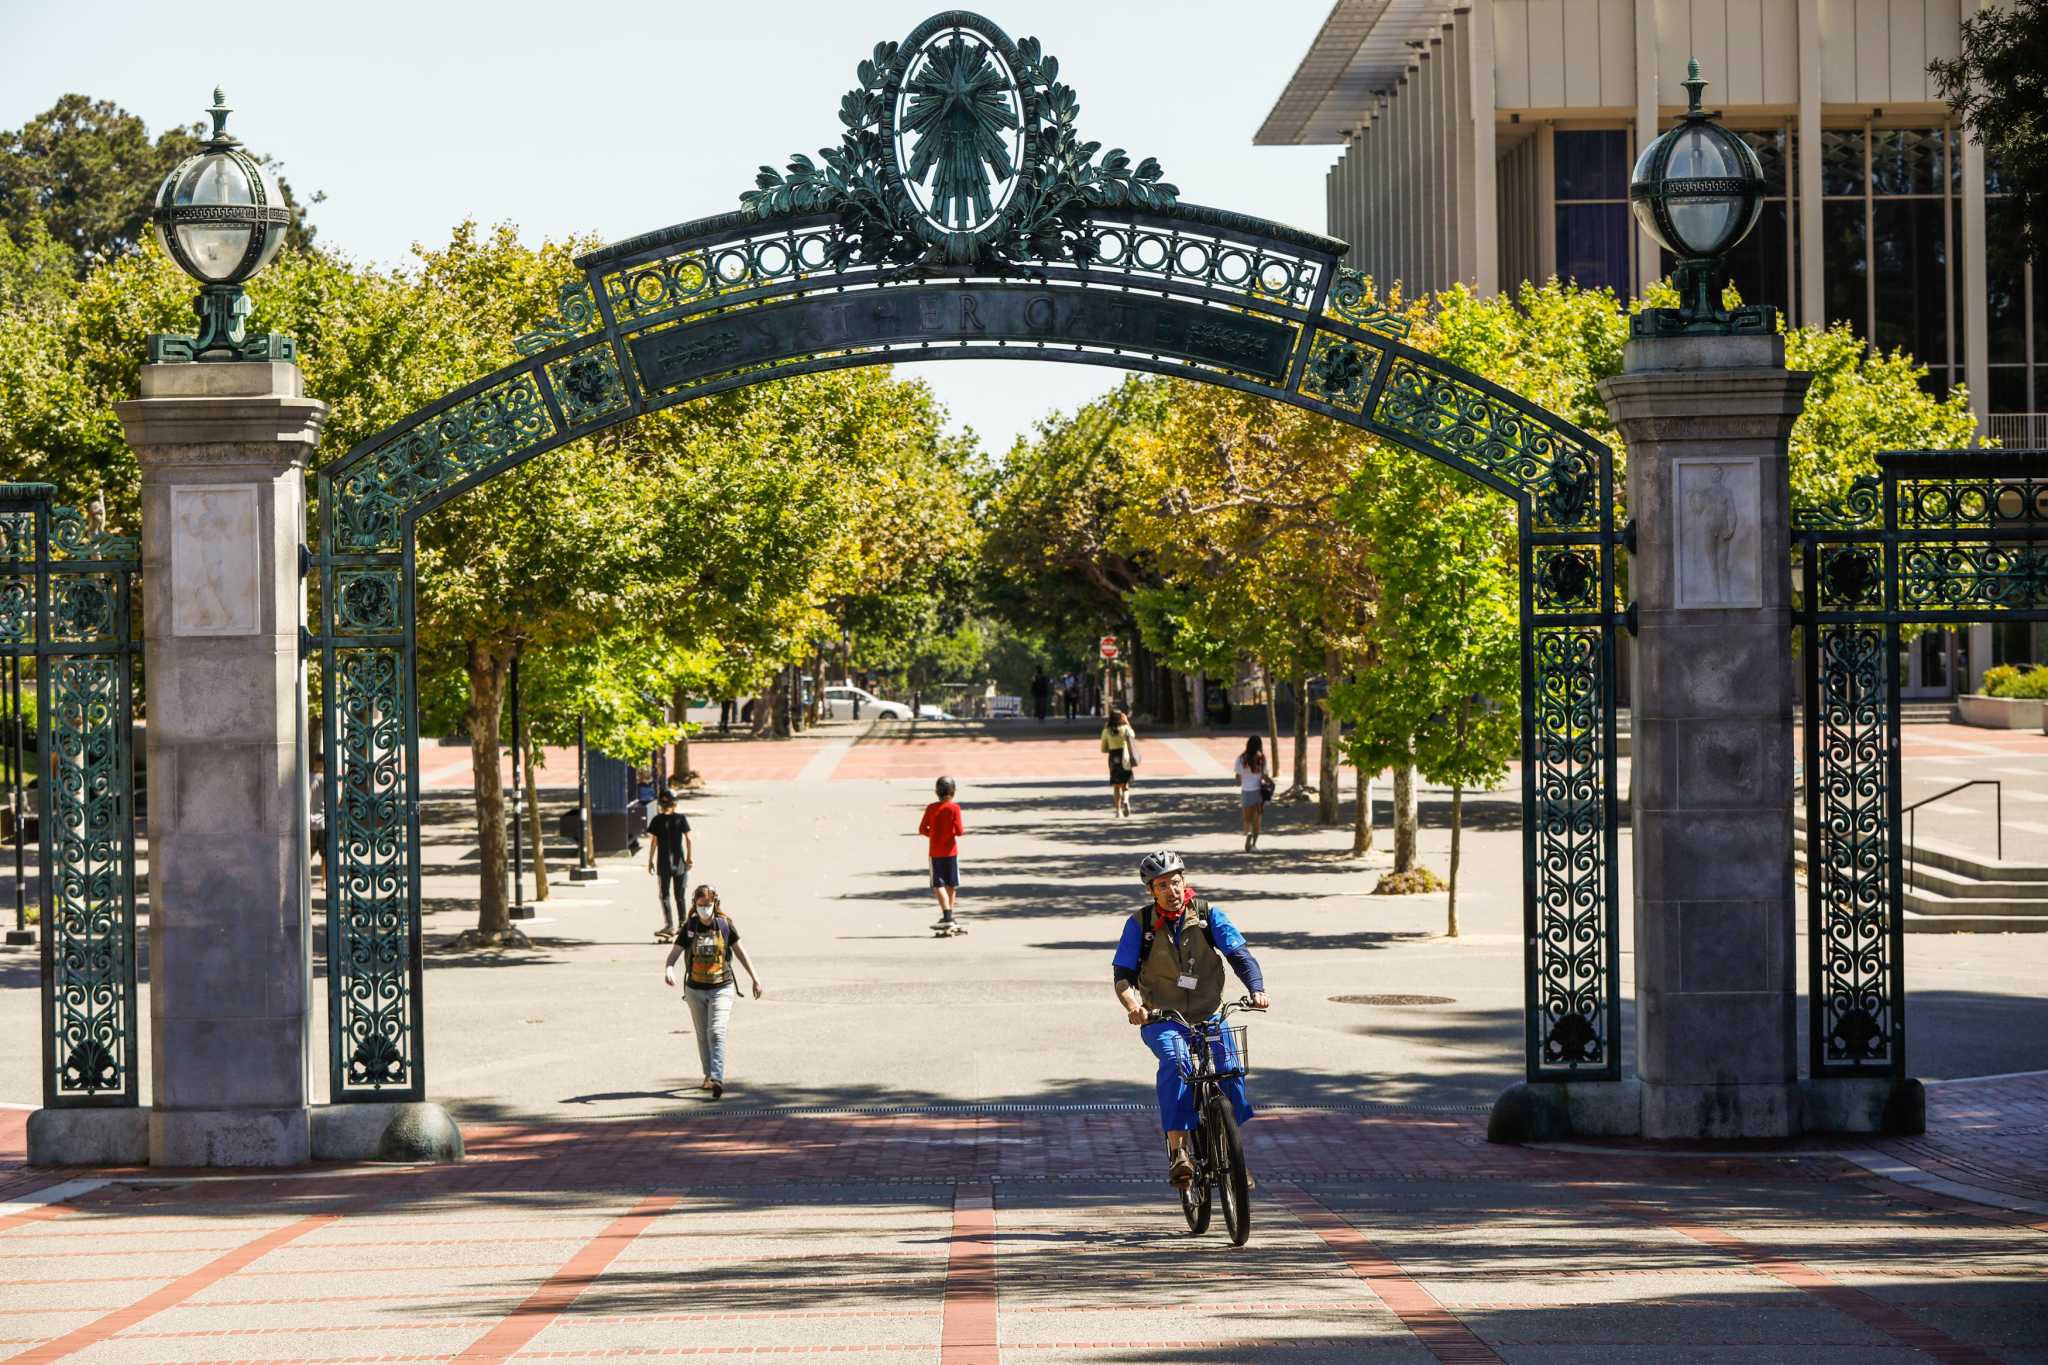 1,000 more students could attend UC Berkeley next fall — if